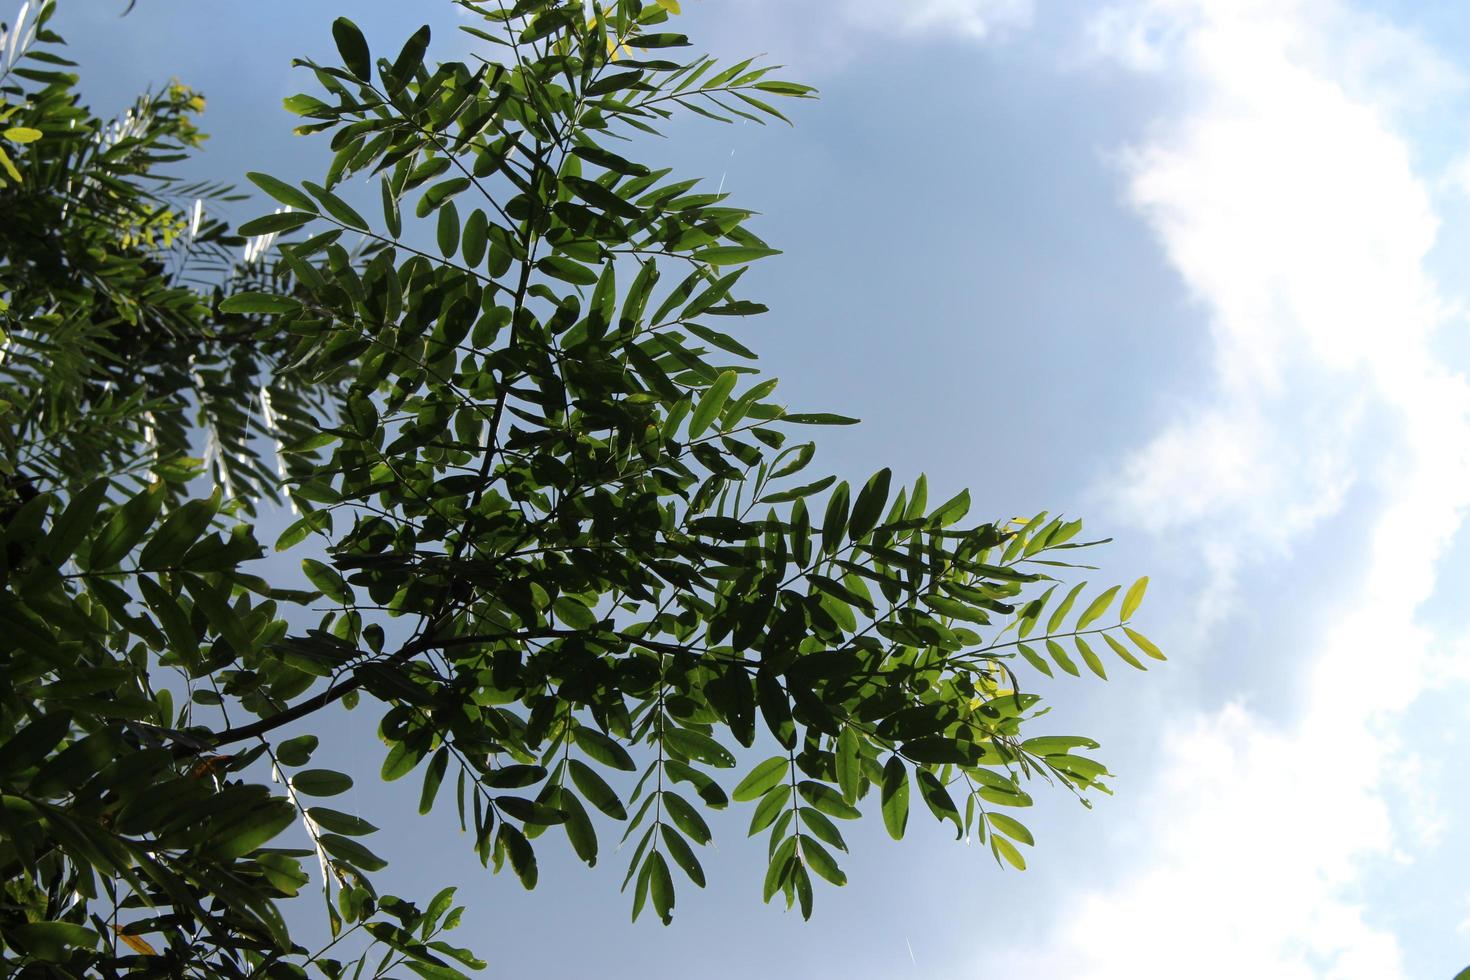 A tree with dense leaves and a bright blue sky seen from below or a low angle. Perspective photo